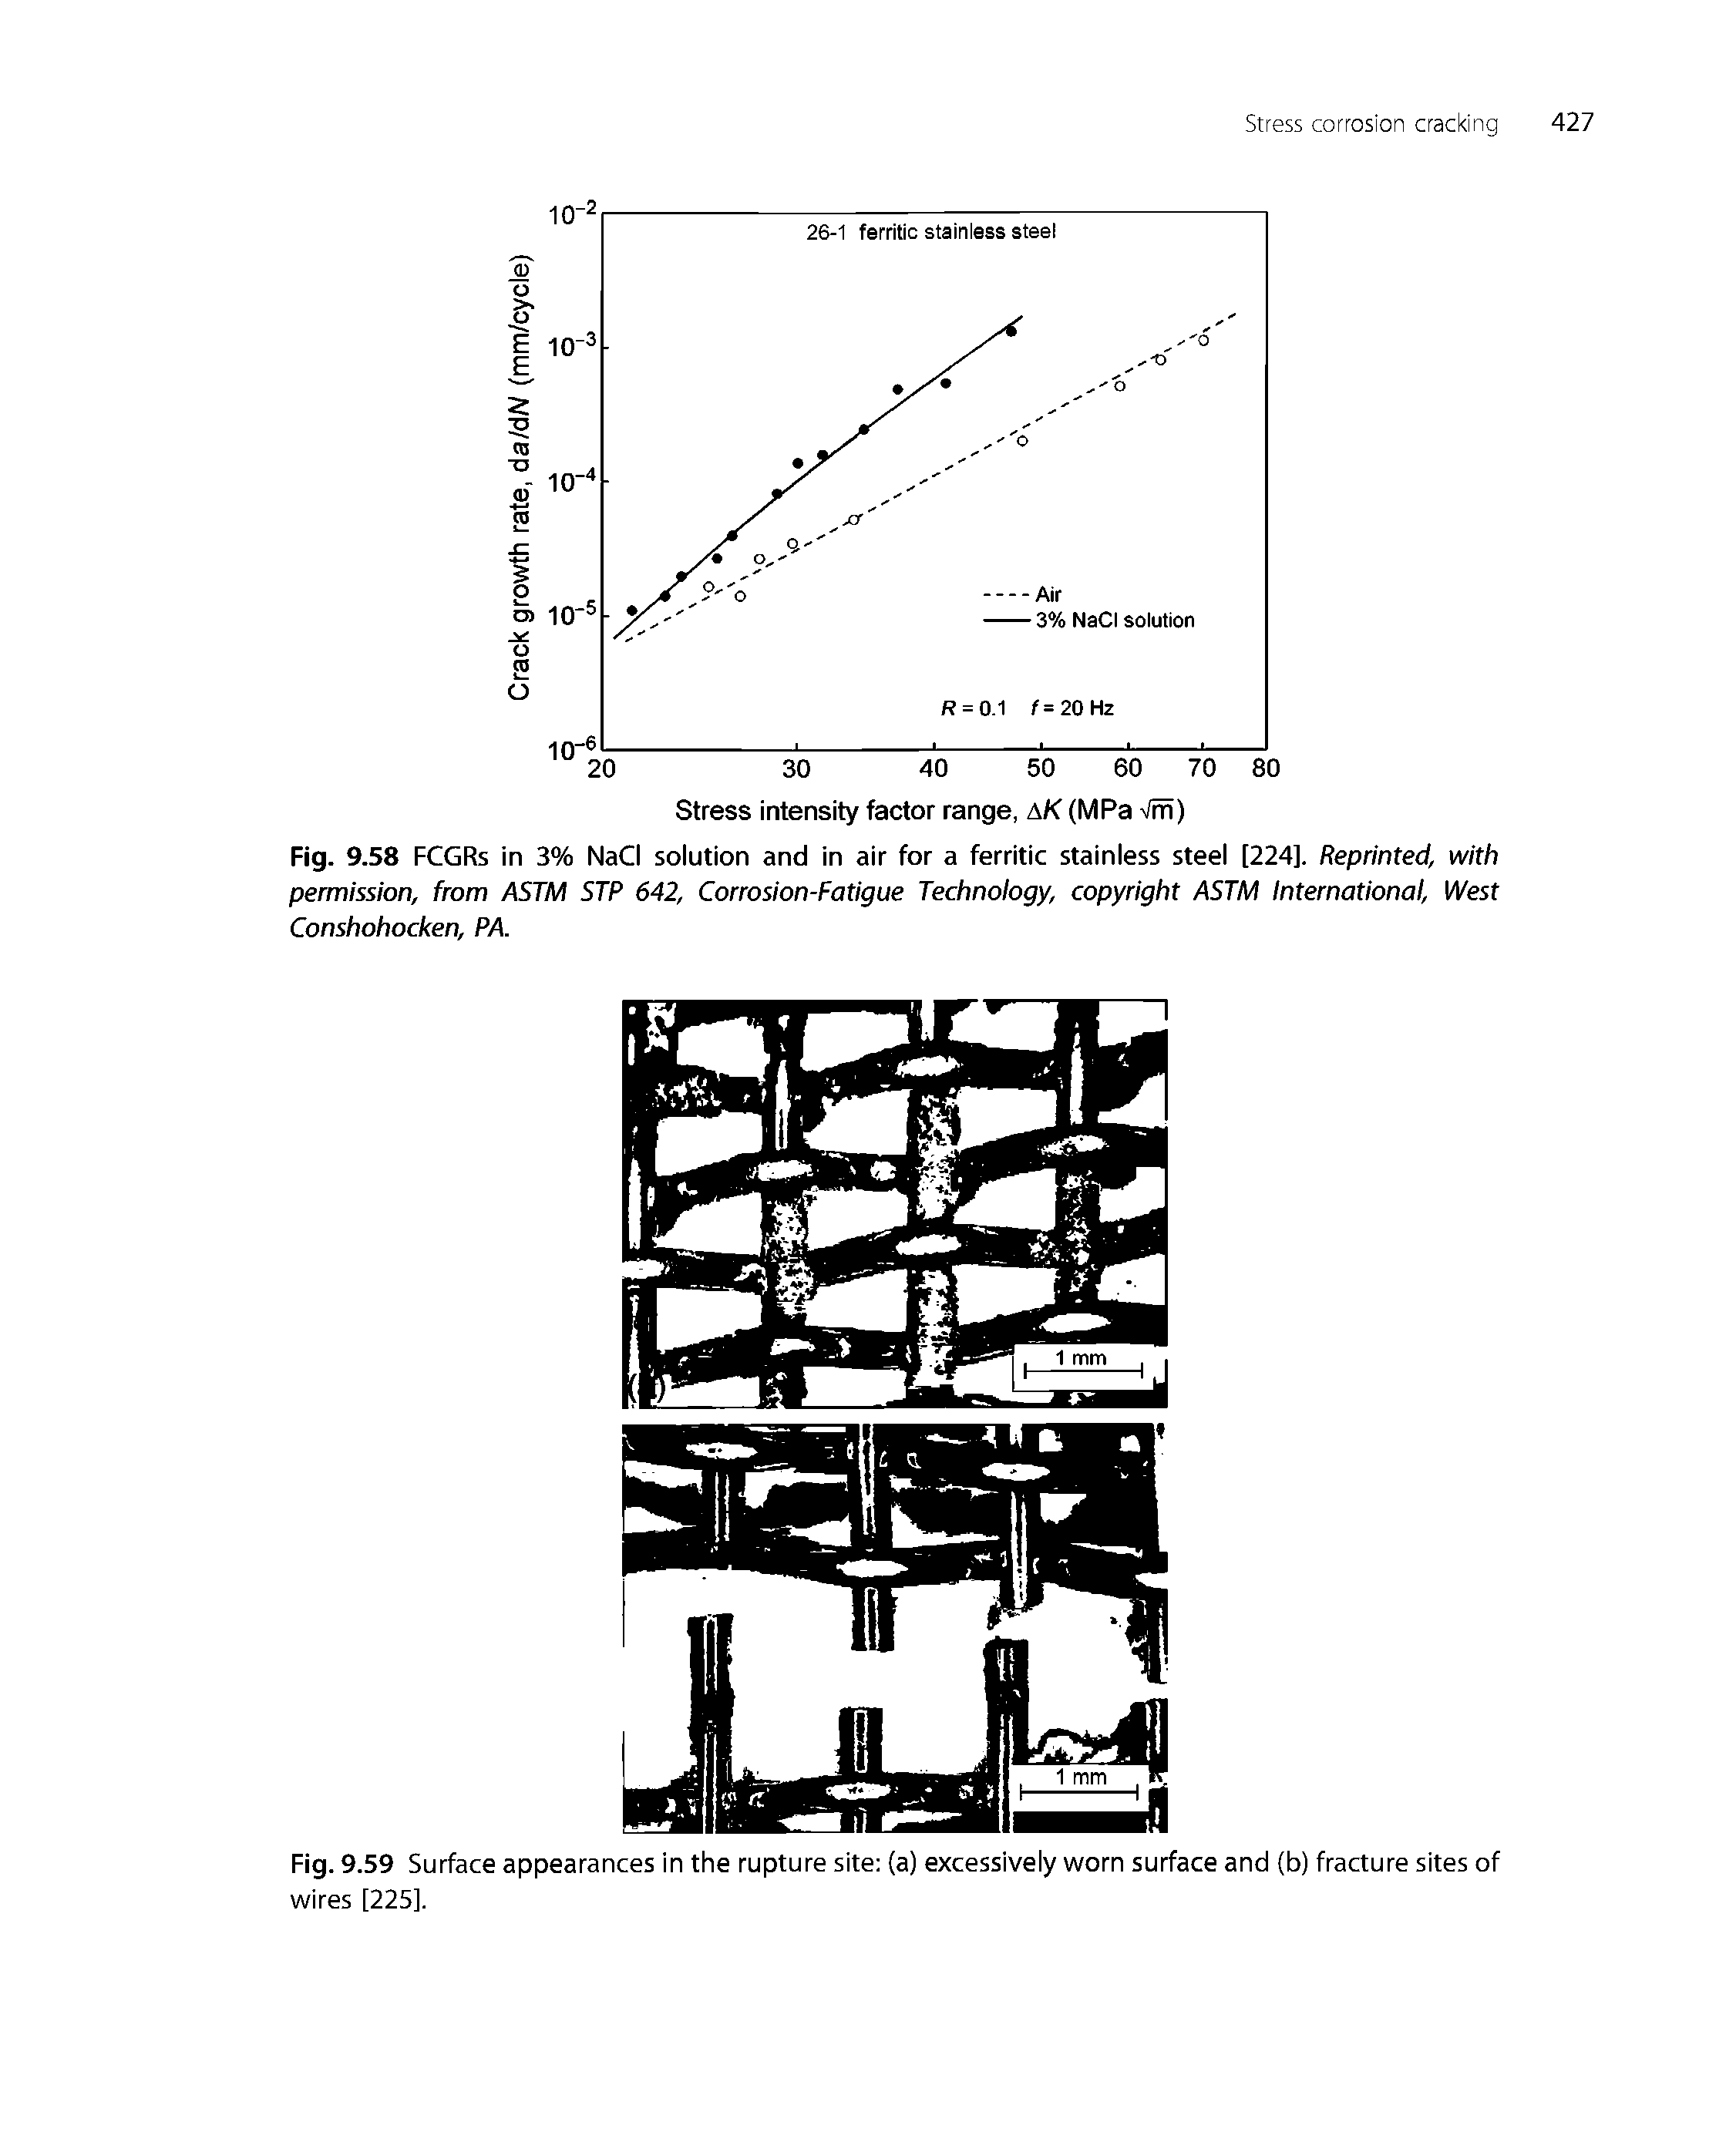 Fig. 9.58 FCGRs in 3% NaCI solution and in air for a ferritic stainless steel [224]. Reprinted, with permission, from ASTM STP 642, Corrosion-Fatigue Technology, copyright ASTM international. West Conshohocken, PA...